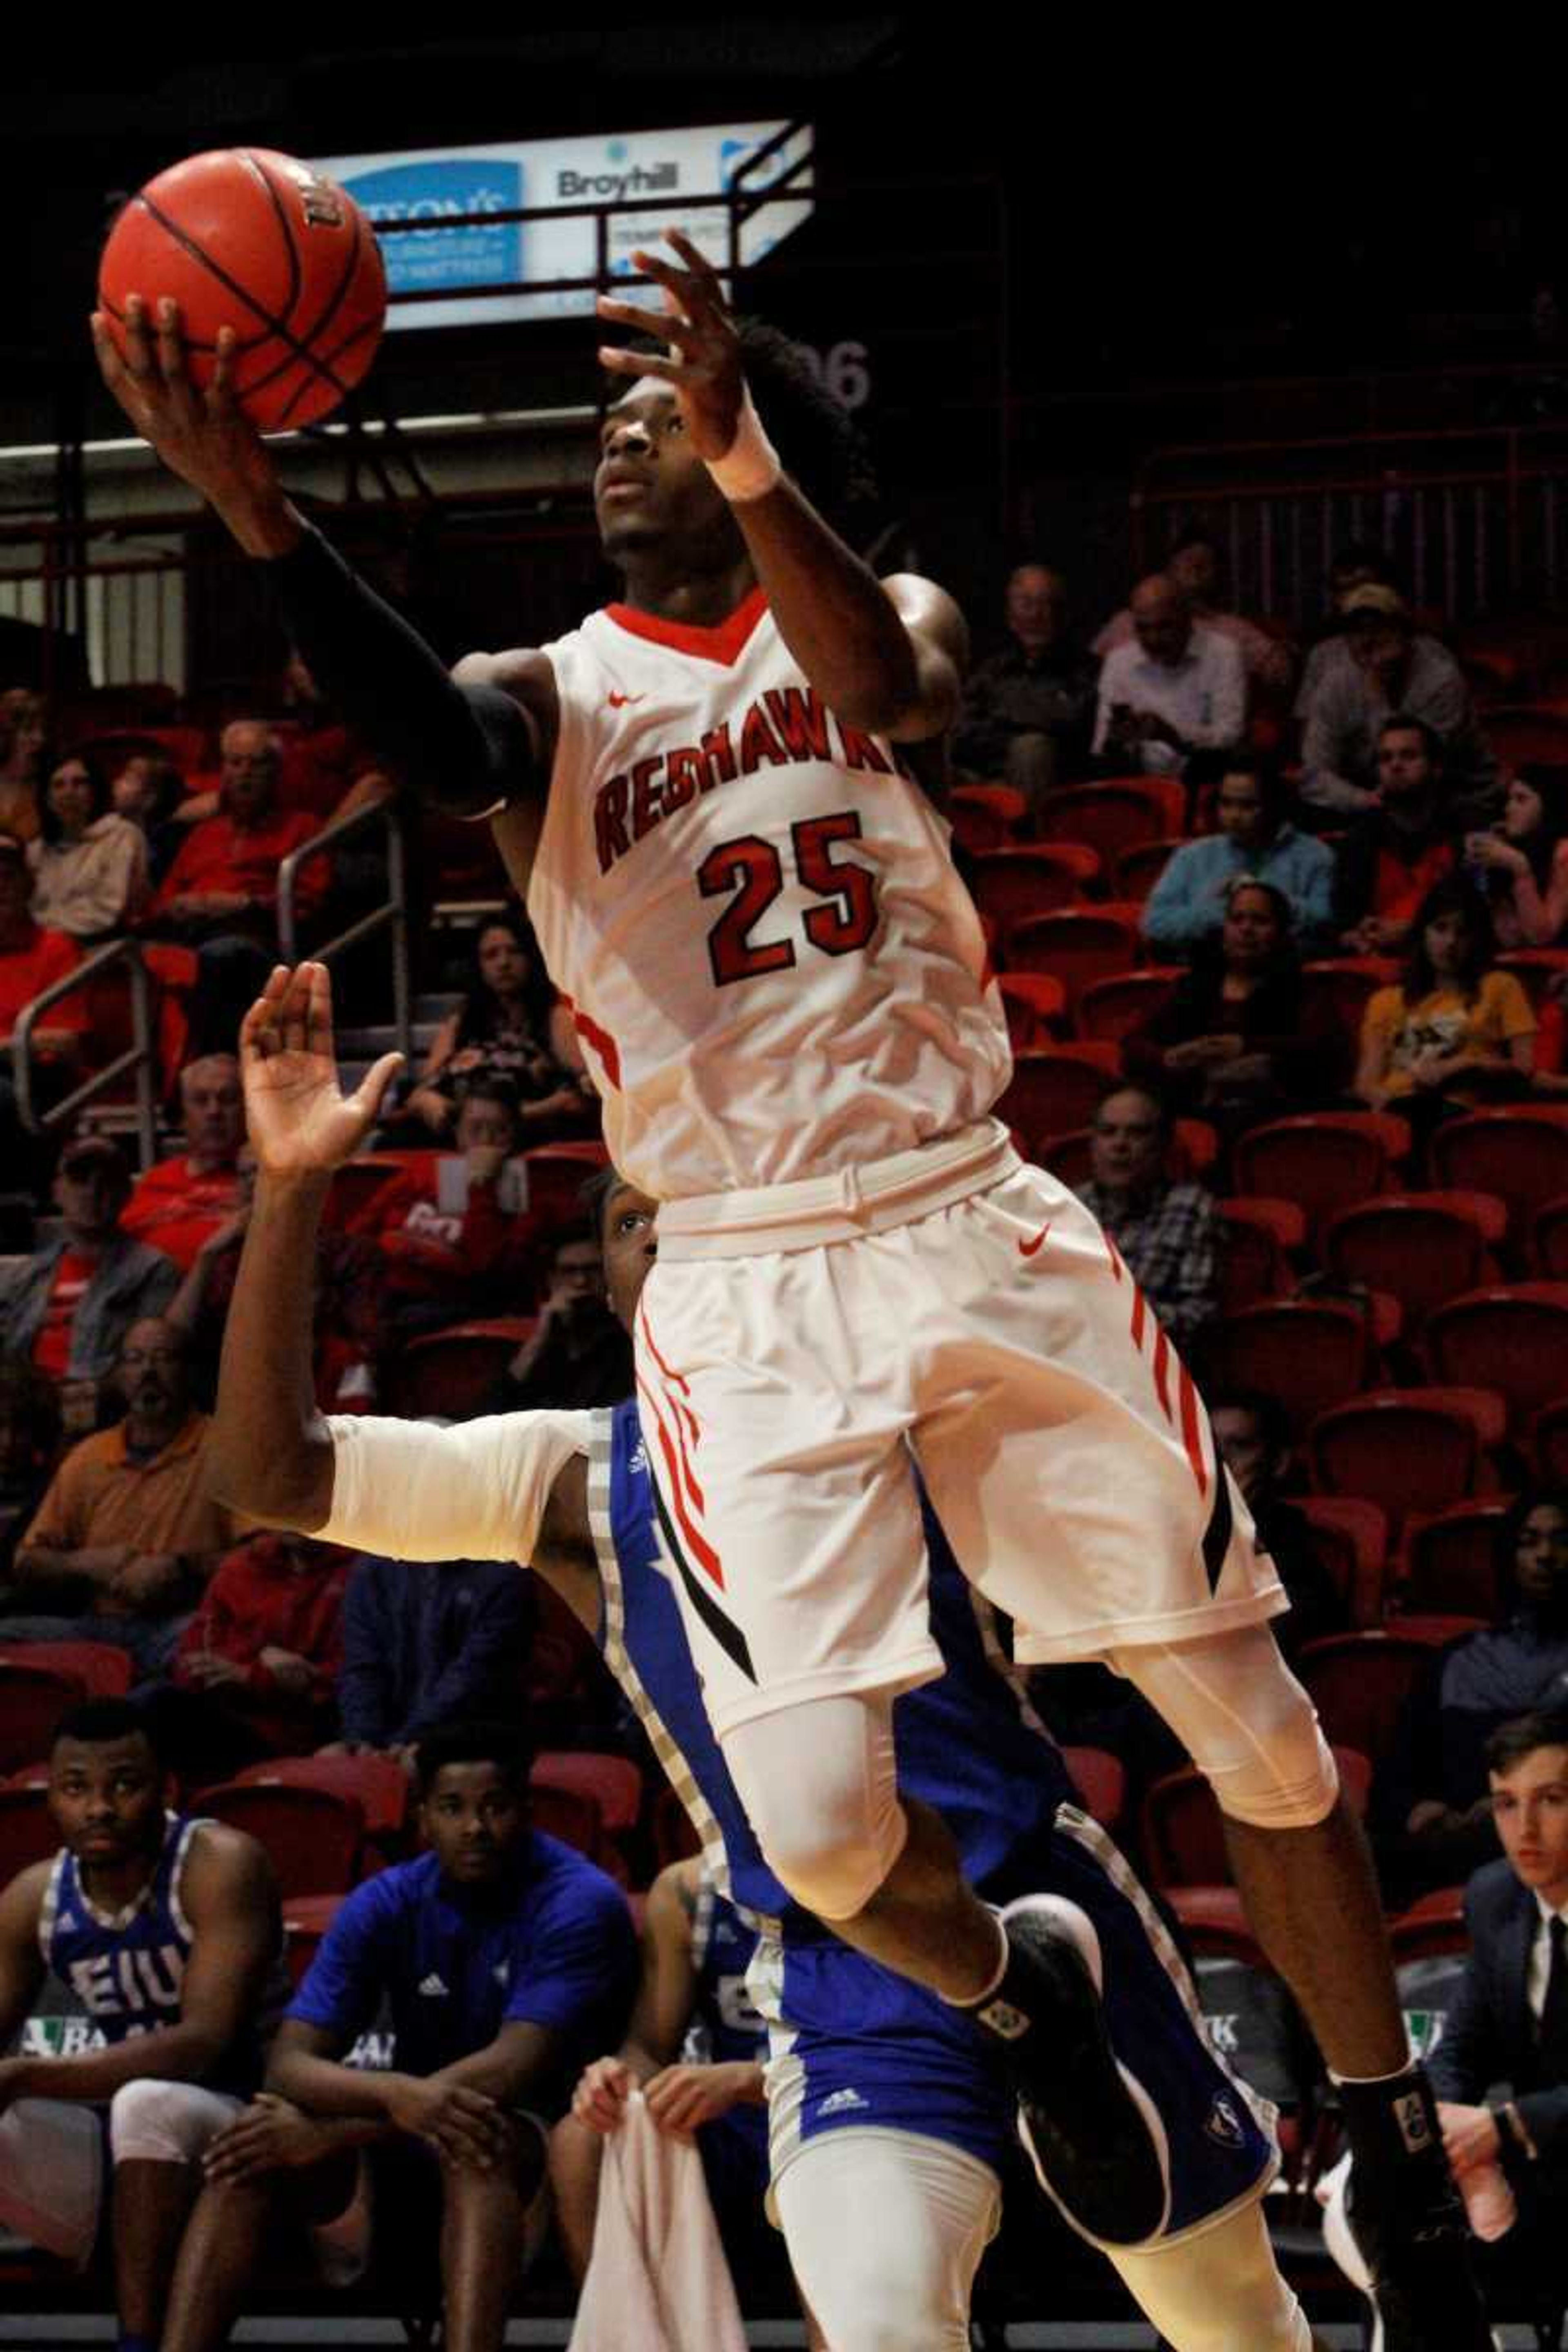 Ledarrius Brewer leads the Redhawks to victory over Eastern Illinois